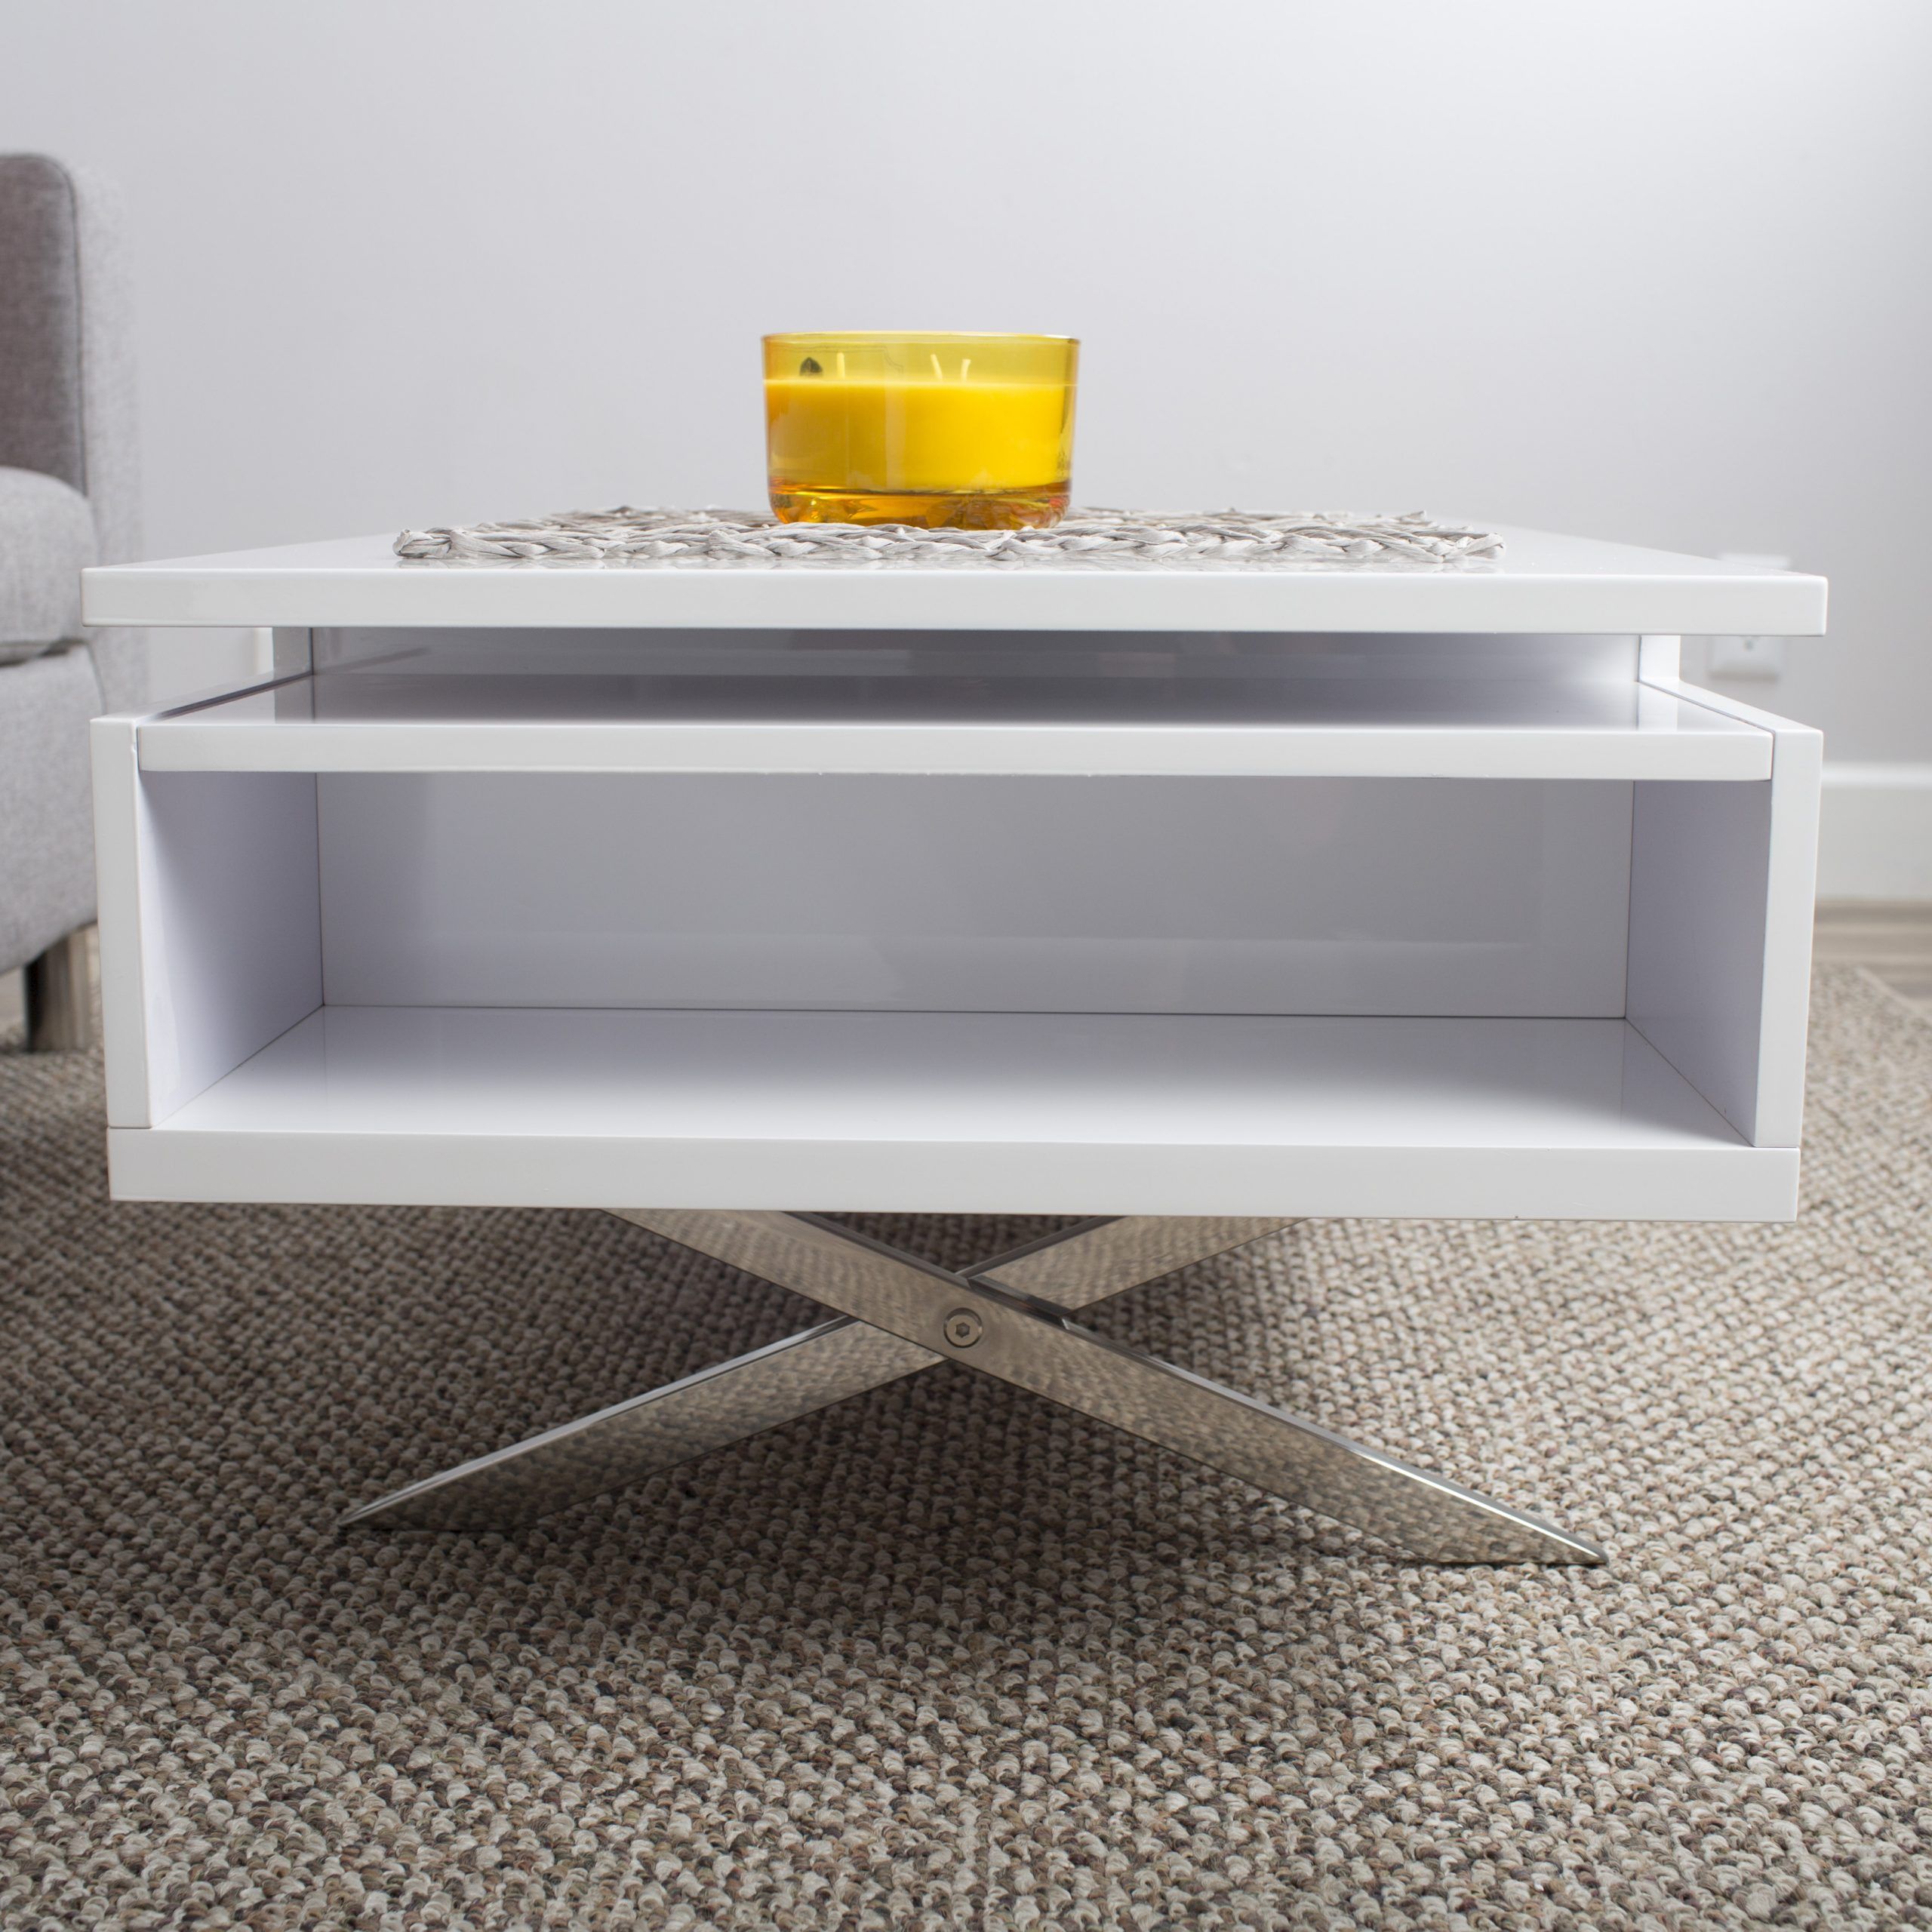 Stelar White Lacquer High Gloss Lift Top Rectangular Pertaining To Most Current Gloss White Steel Coffee Tables (Gallery 19 of 20)